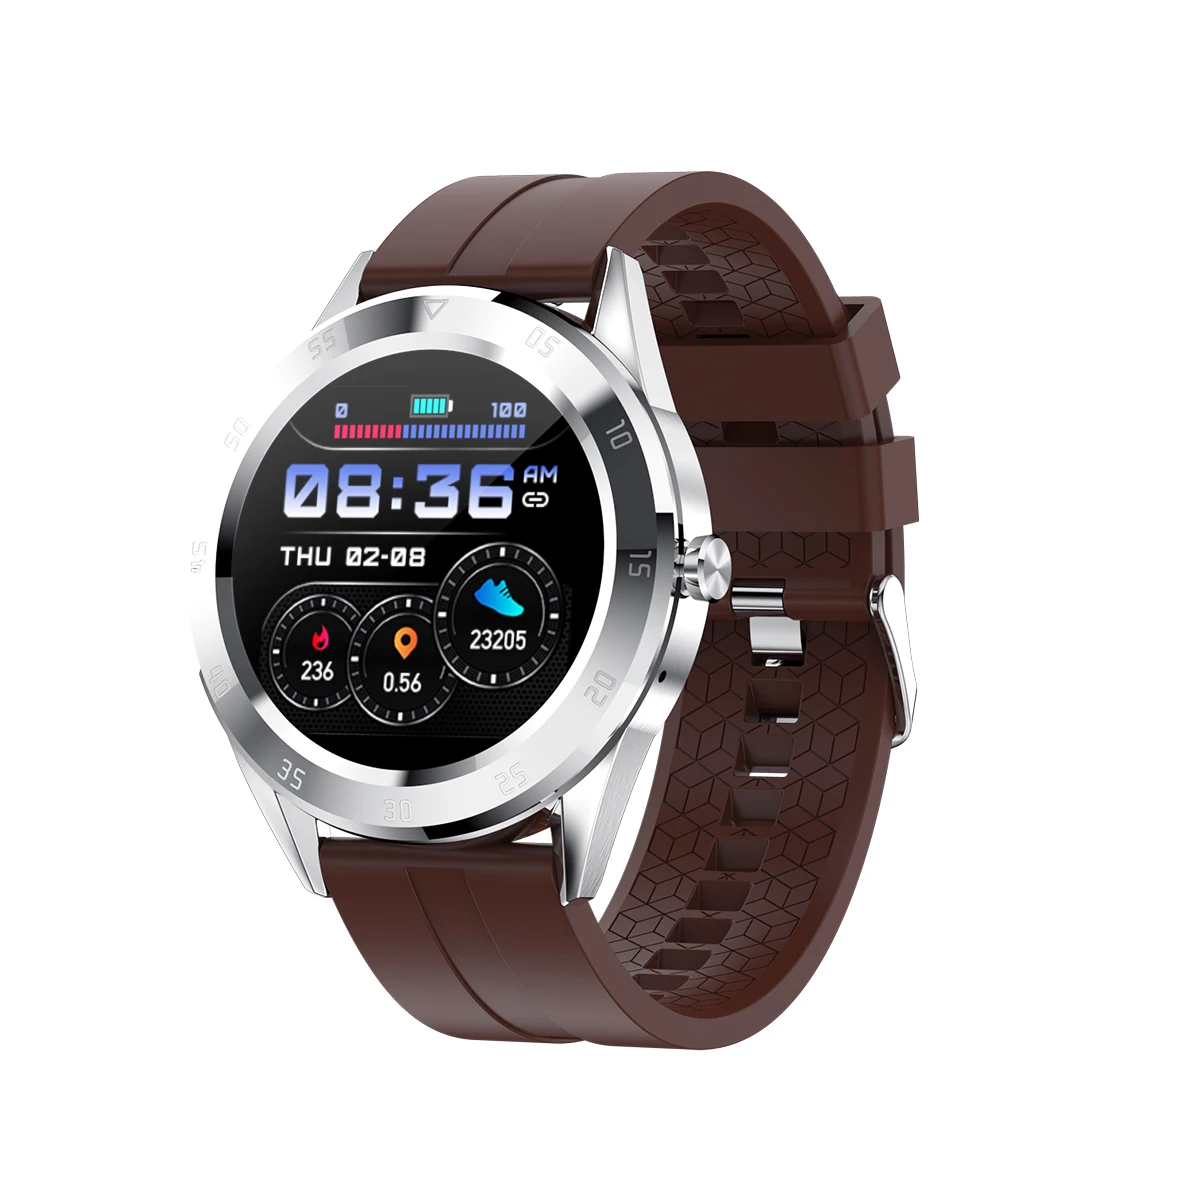 Support Arabic Ukrainian Taiwan and Hong Kong Smartwatch NFC Y12  watch diesel weather forecast blood oxygen outdoor exercise